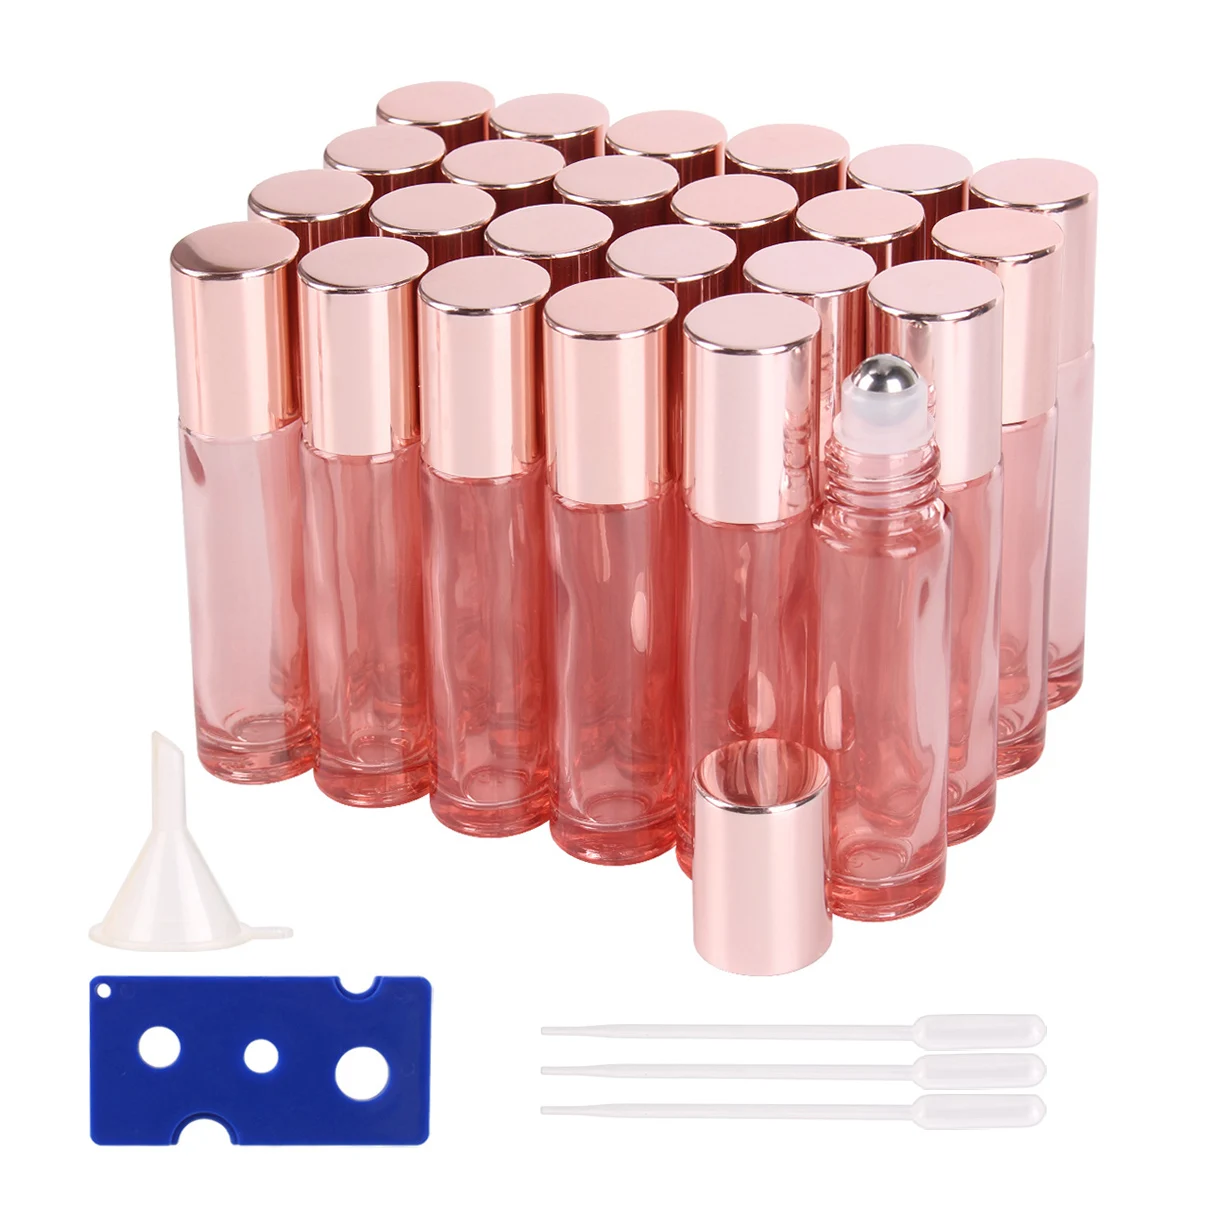 24 pieces 5ml/10ml Pink/Matte Rose/Transparent Glass Roll on Bottle with Stainless Steel Roller Ball for Perfume Essential Oil images - 6